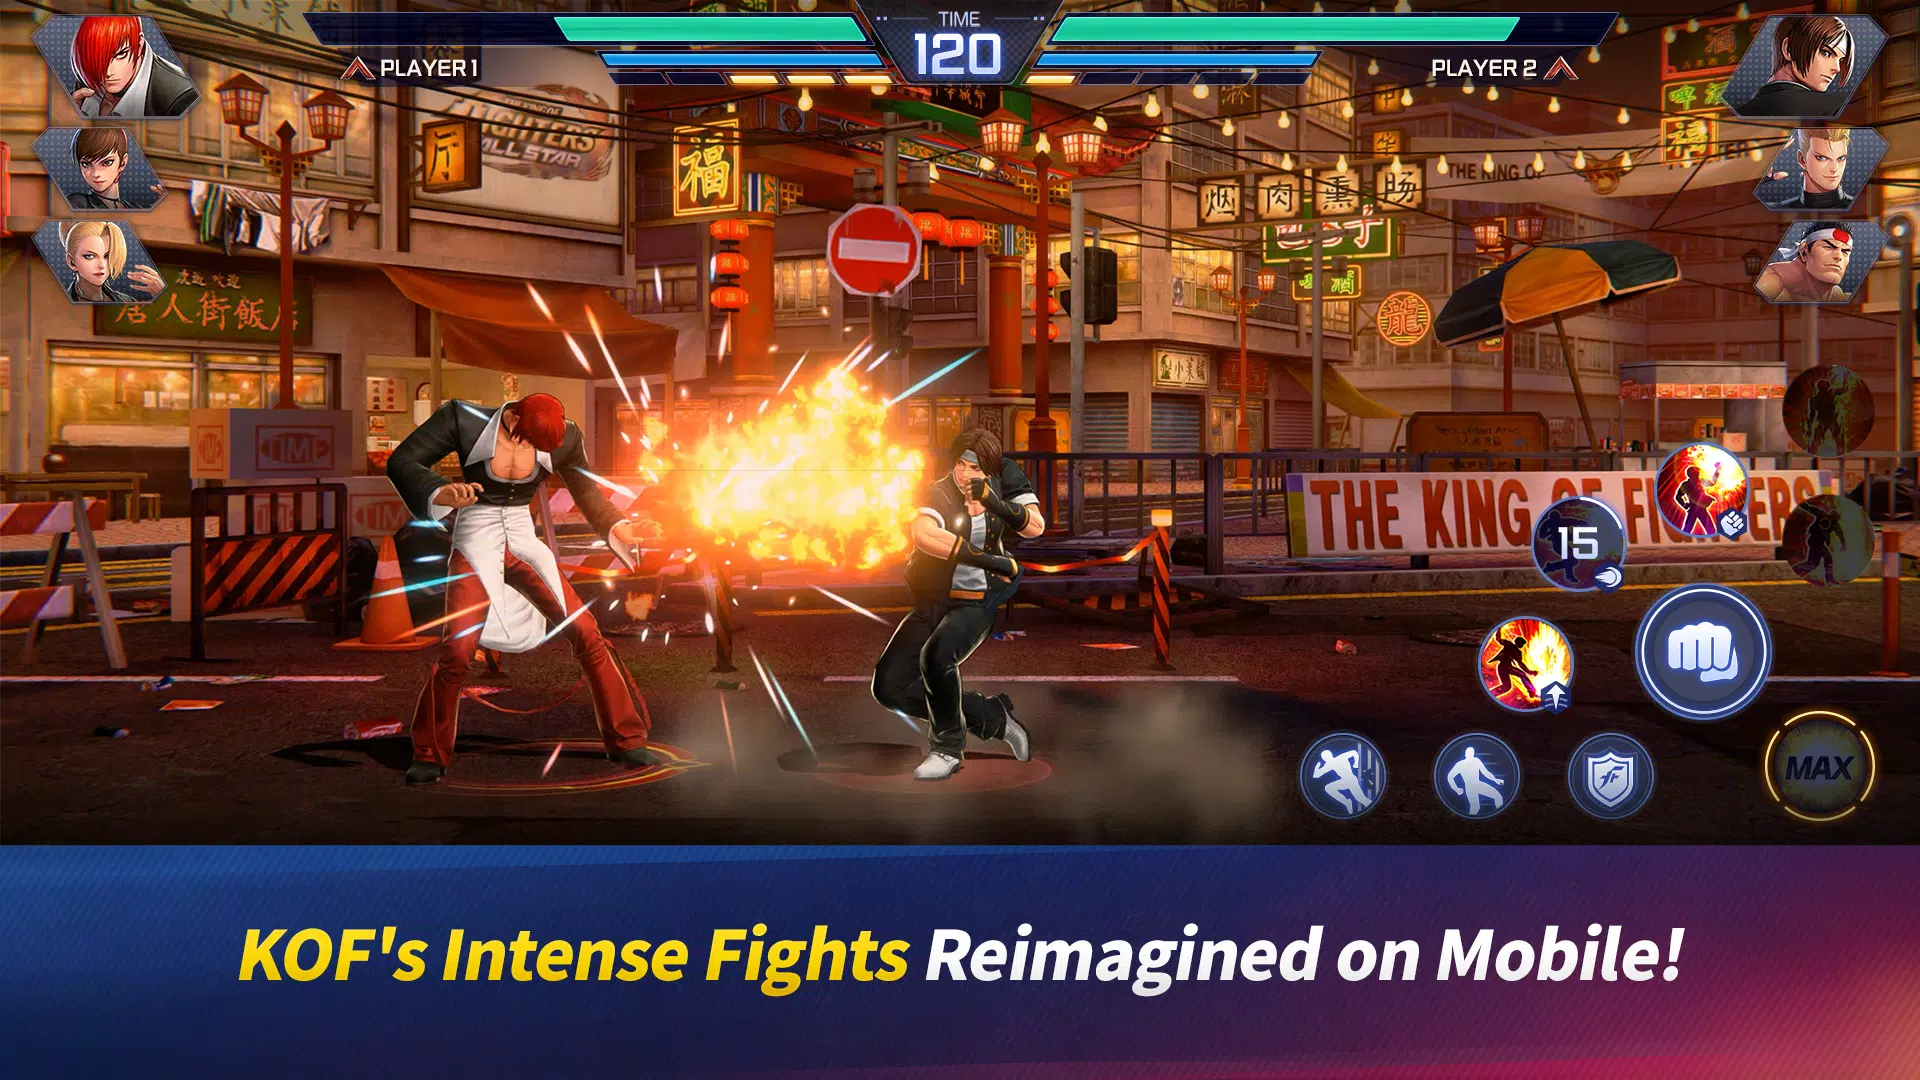 Download The King Of Fighters 2002 APK latest v1.0 for Android